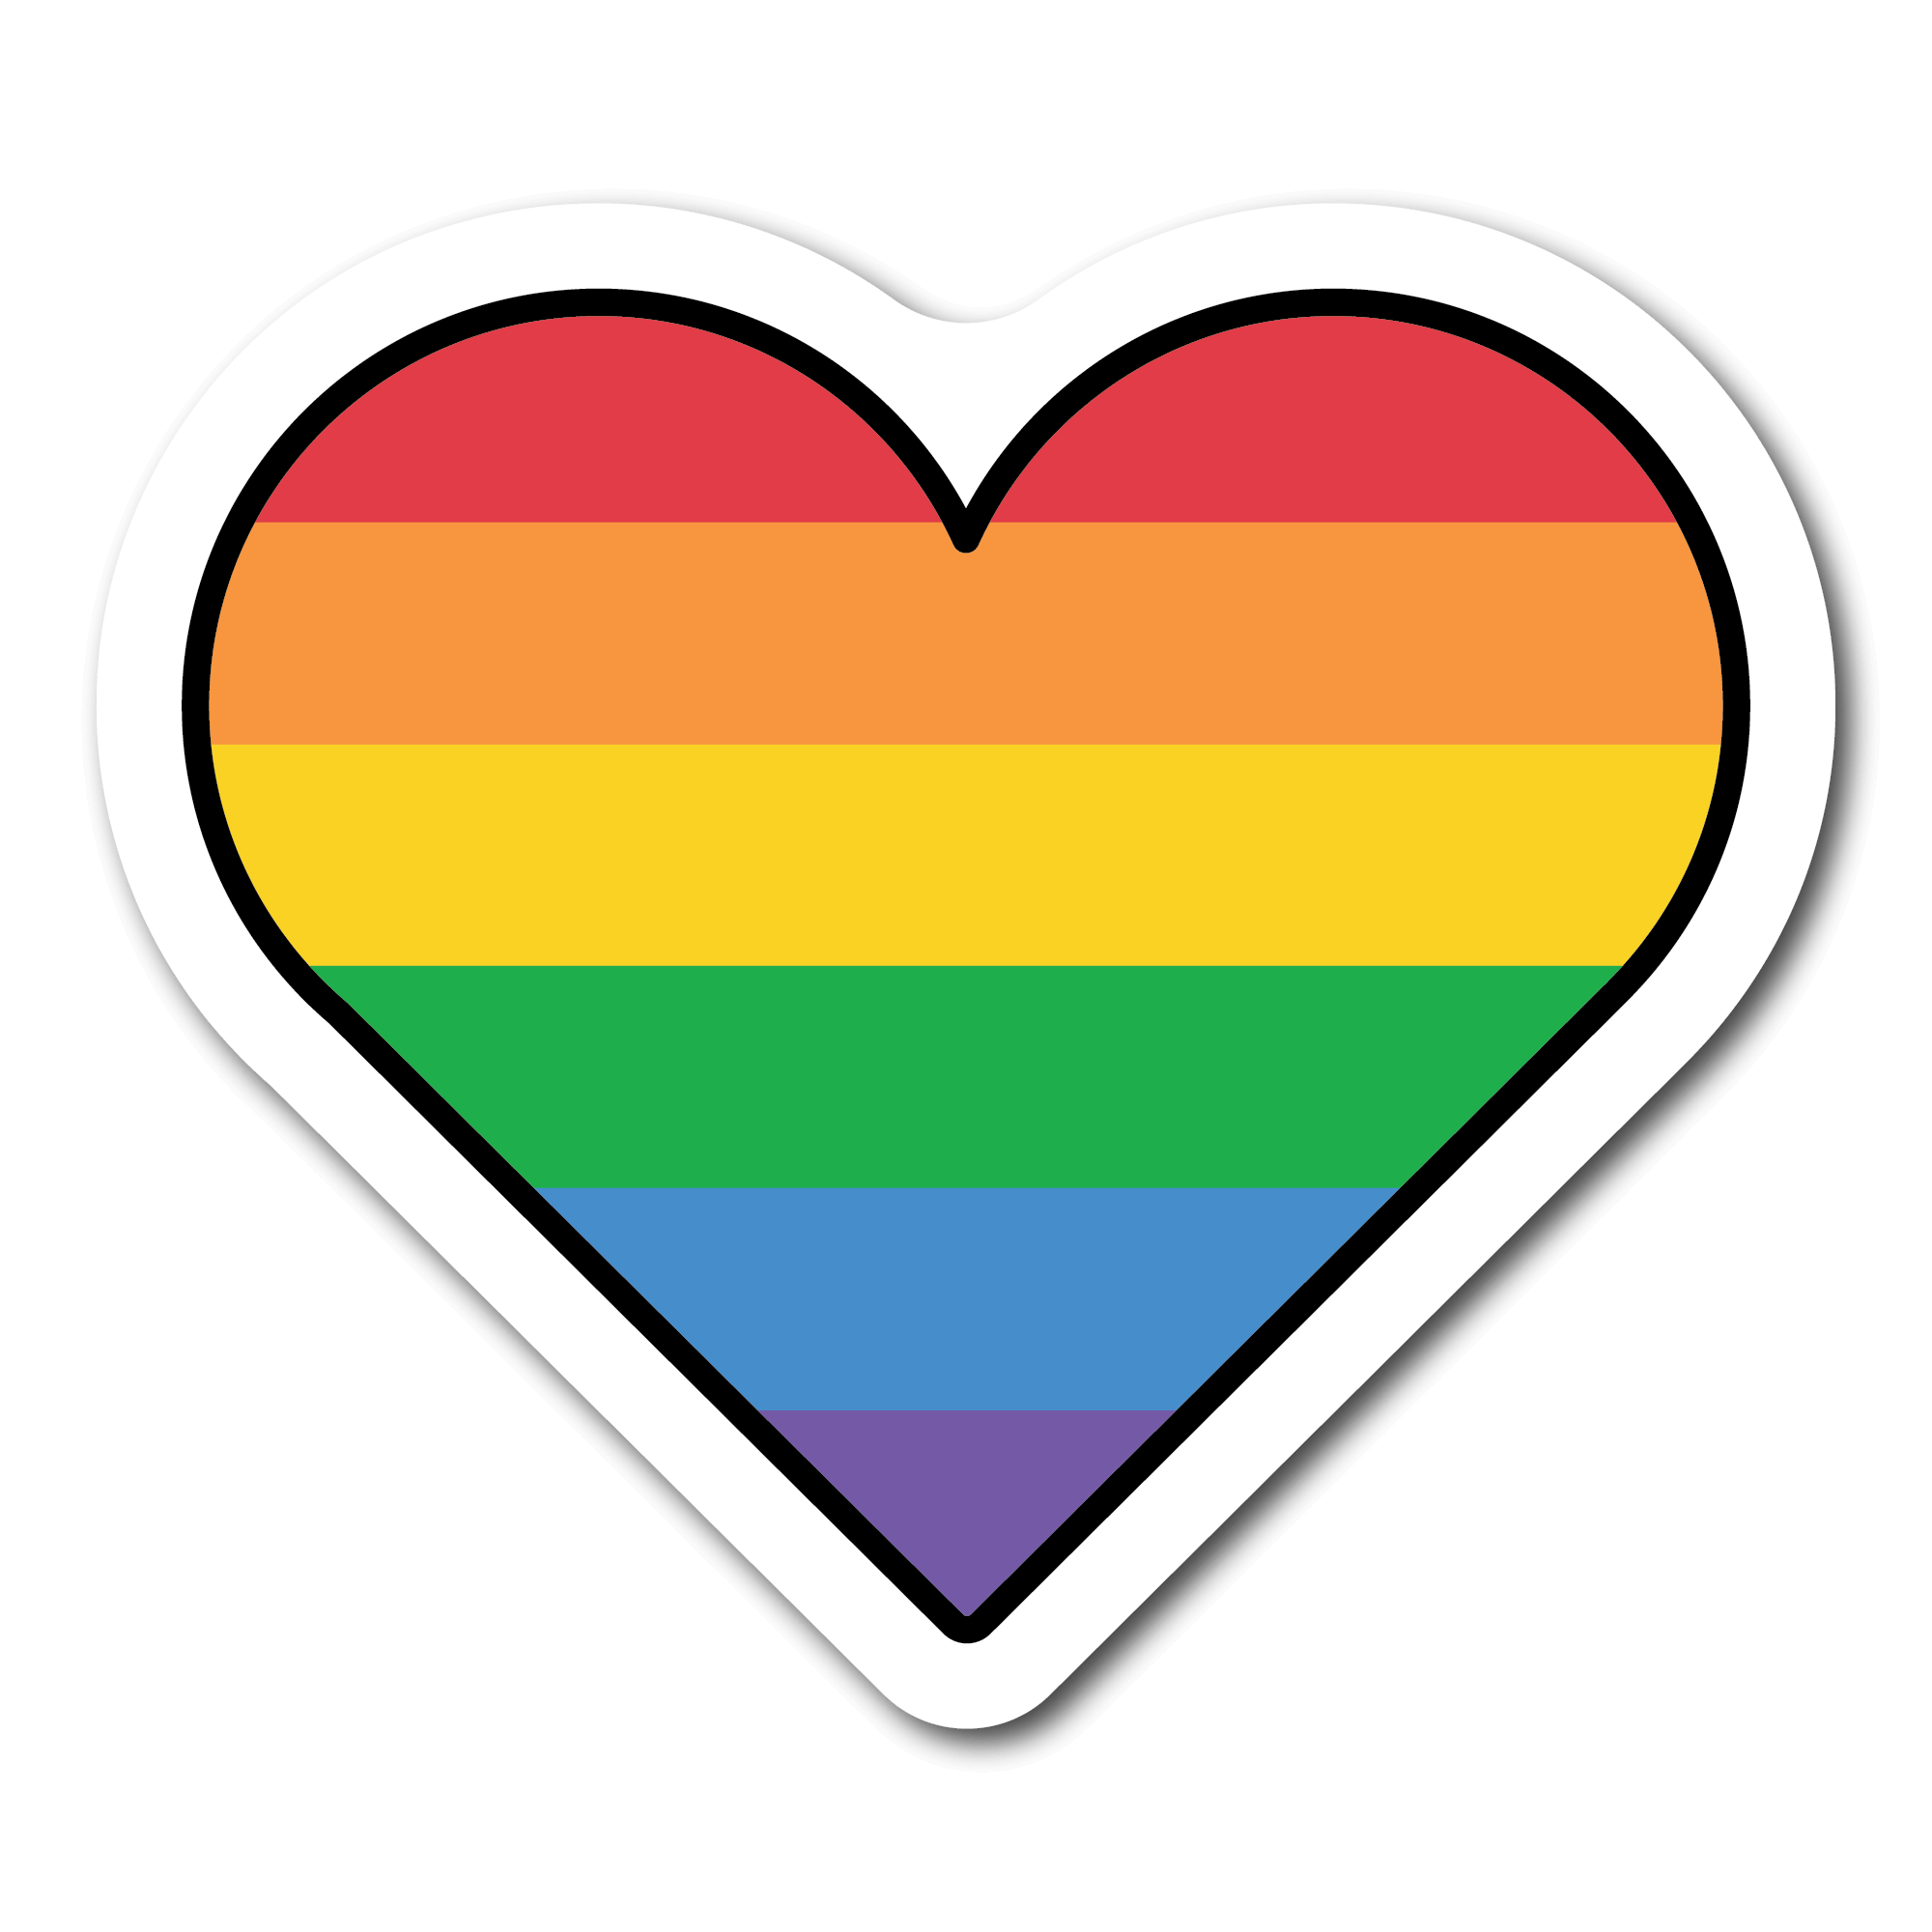 Small Rainbow Flag Sticker in the shape of a heart